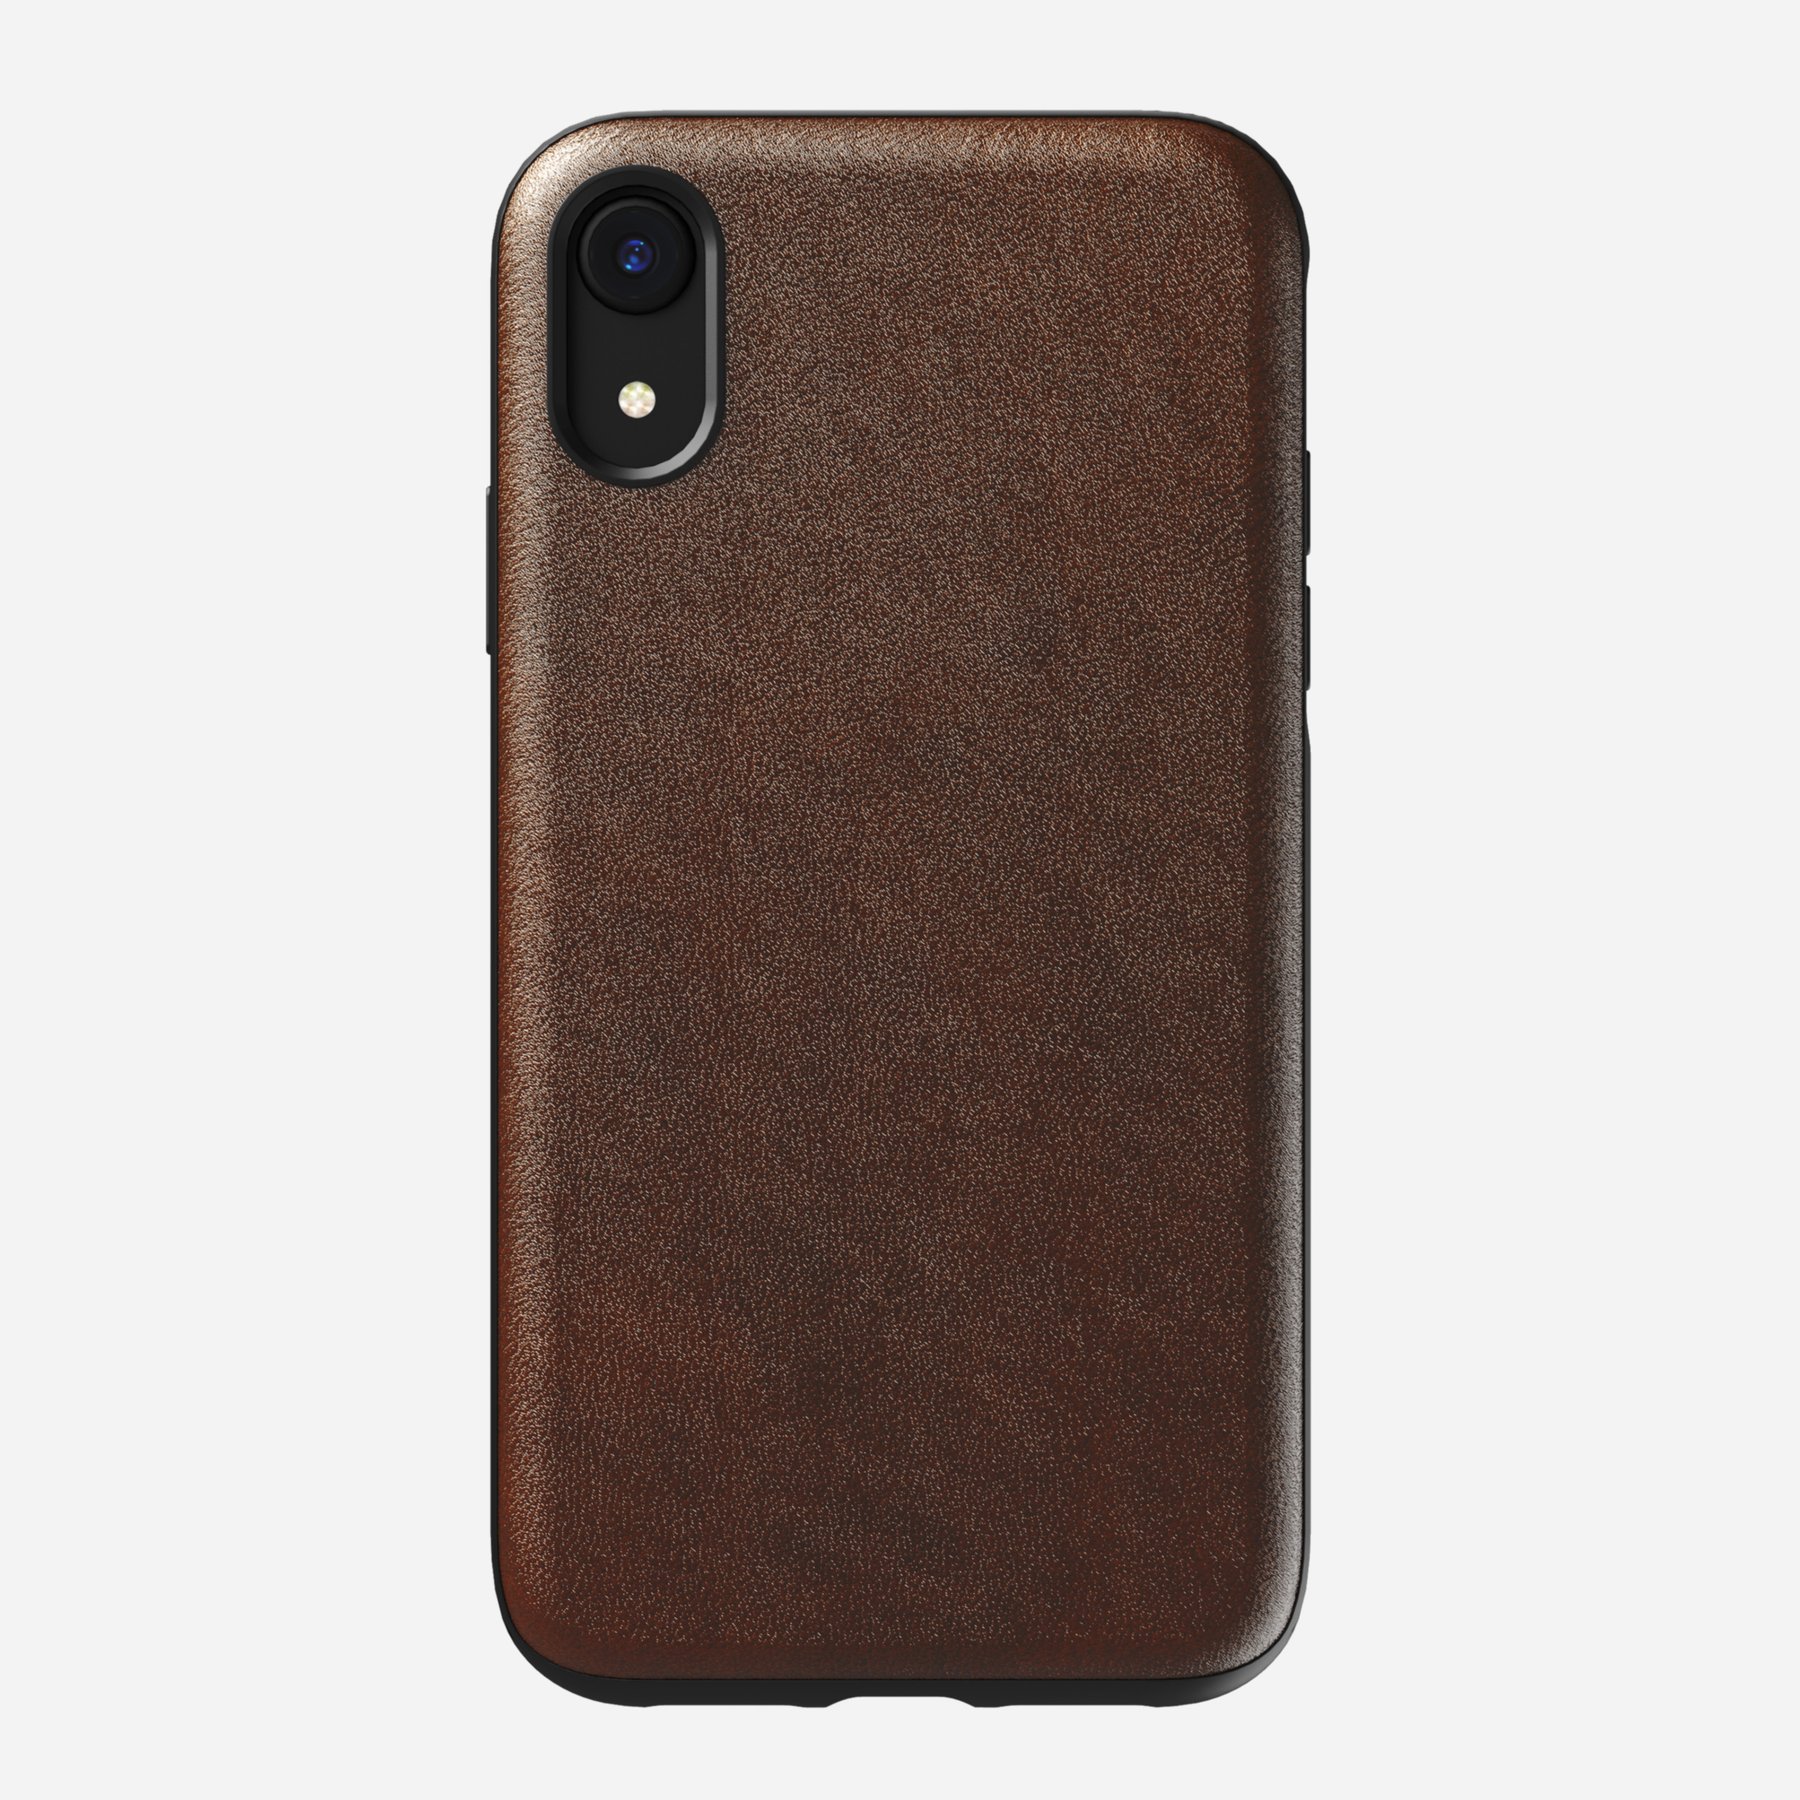 Nomad Cases Offer Stylish Ways to Protect Your iPhone: Rugged Case ...